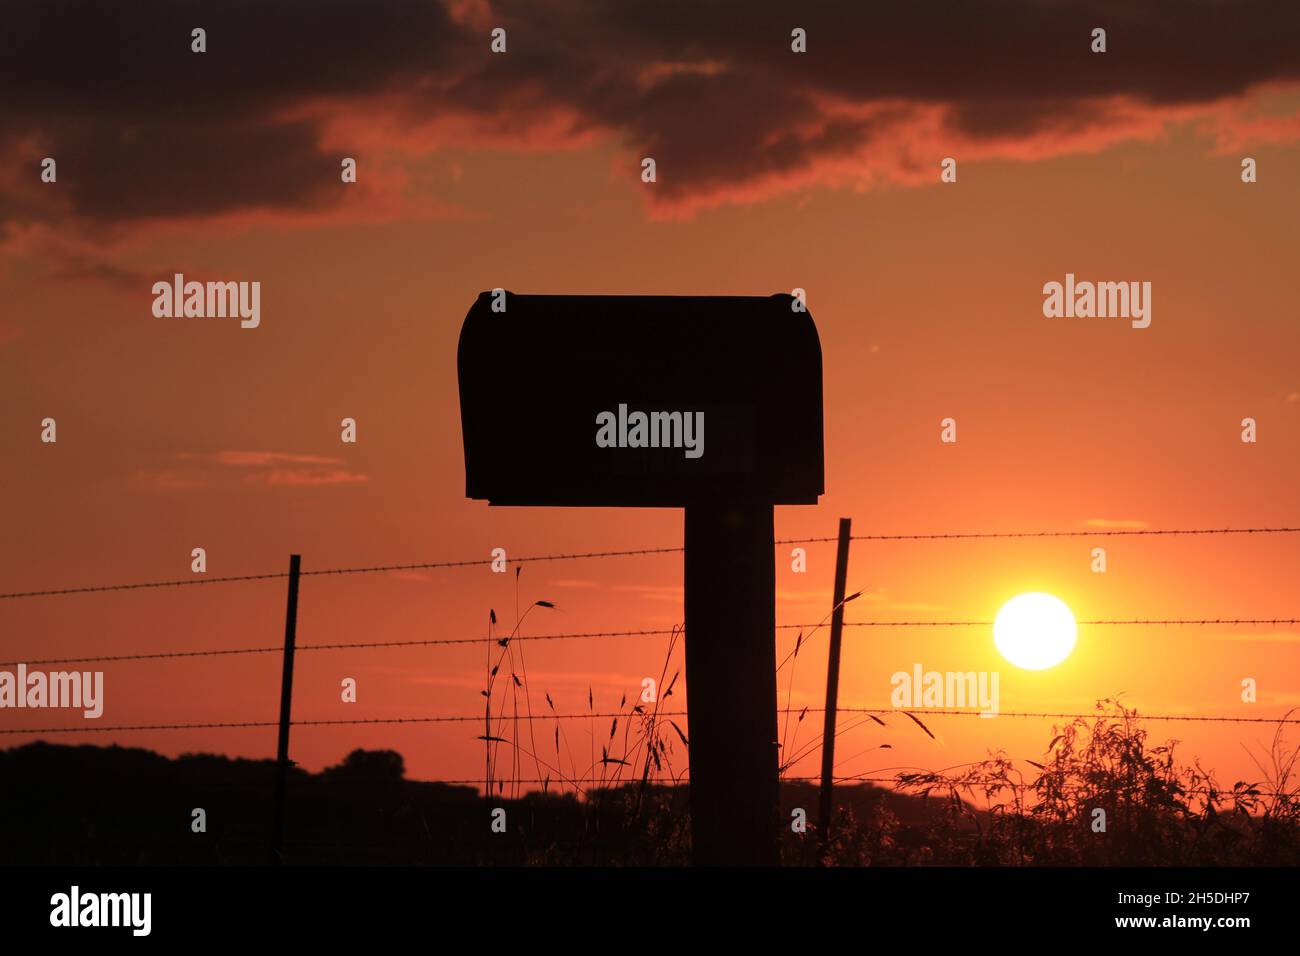 Kansas colorful Blazing orange Sunset with a mail box silhouette out in the country. Stock Photo